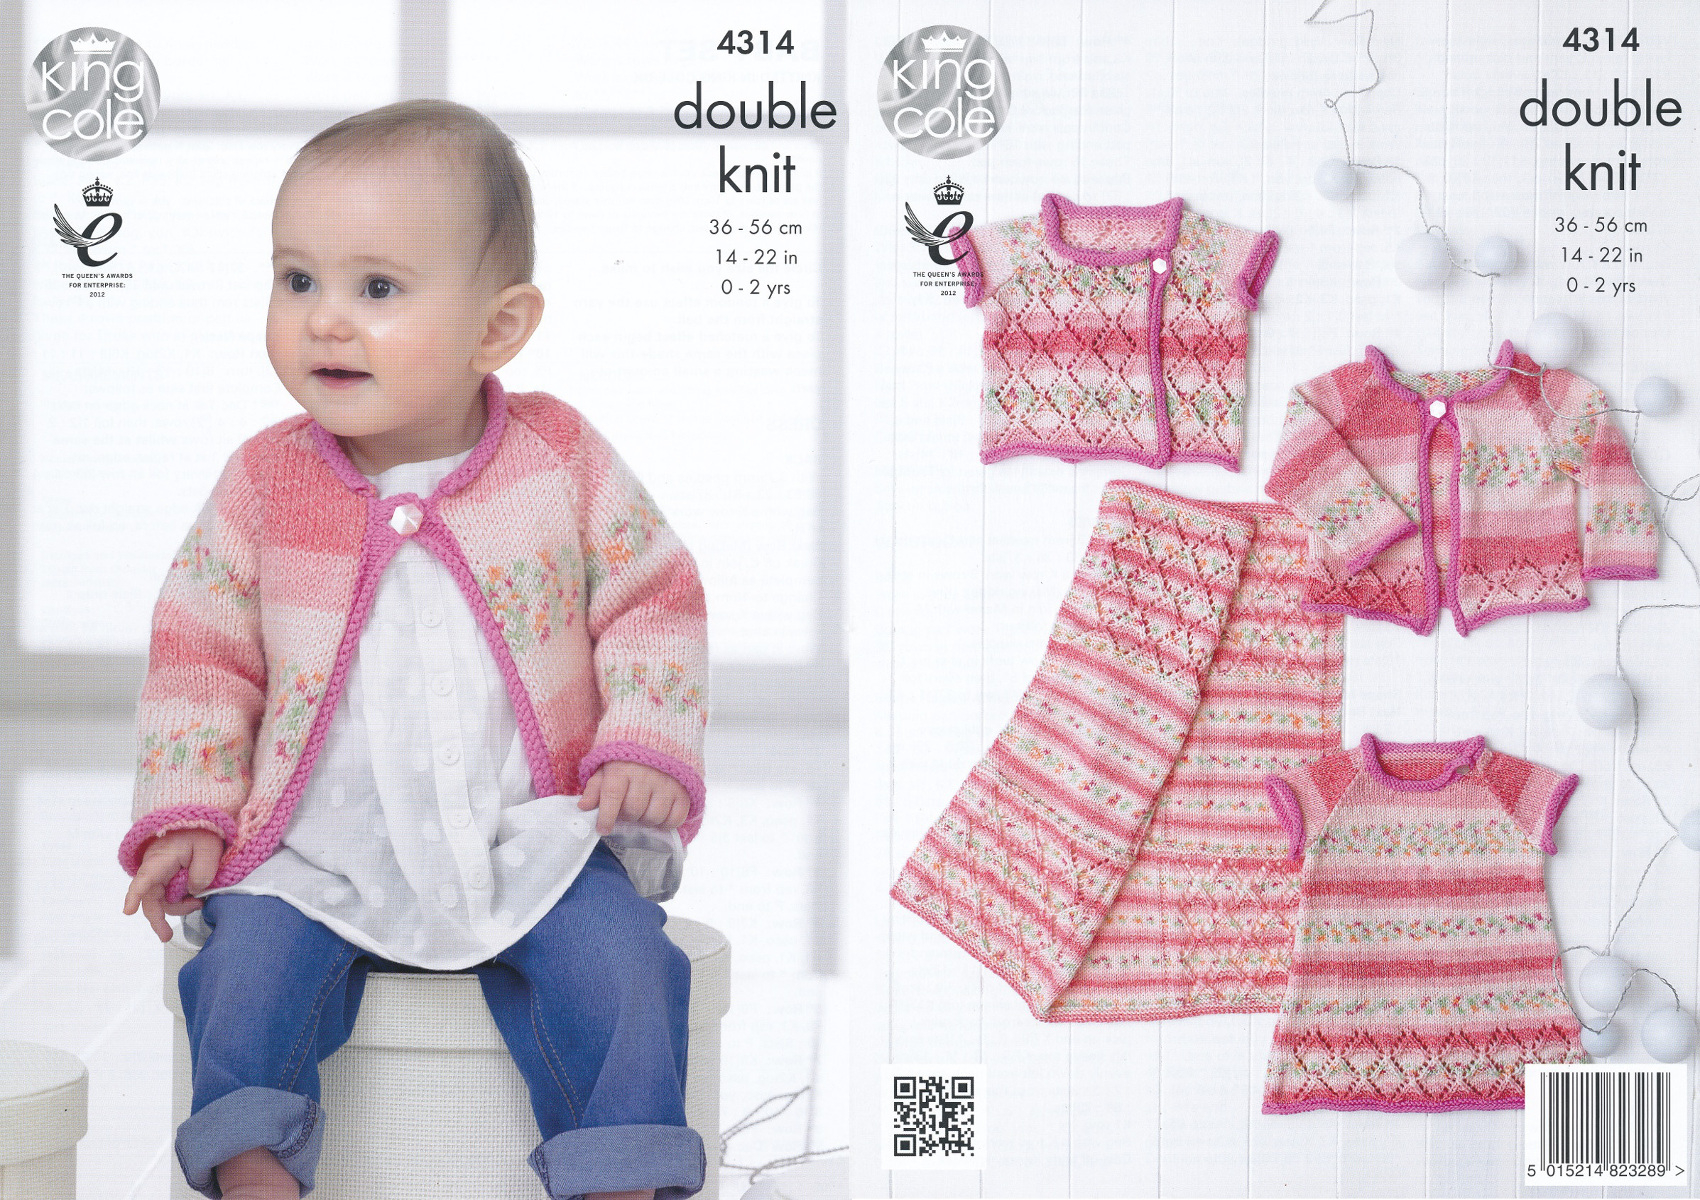 Double Knitting Baby Patterns Details About King Cole Double Knitting Pattern Ba Dress Cardigan Waistcoat Blanket Set 4314